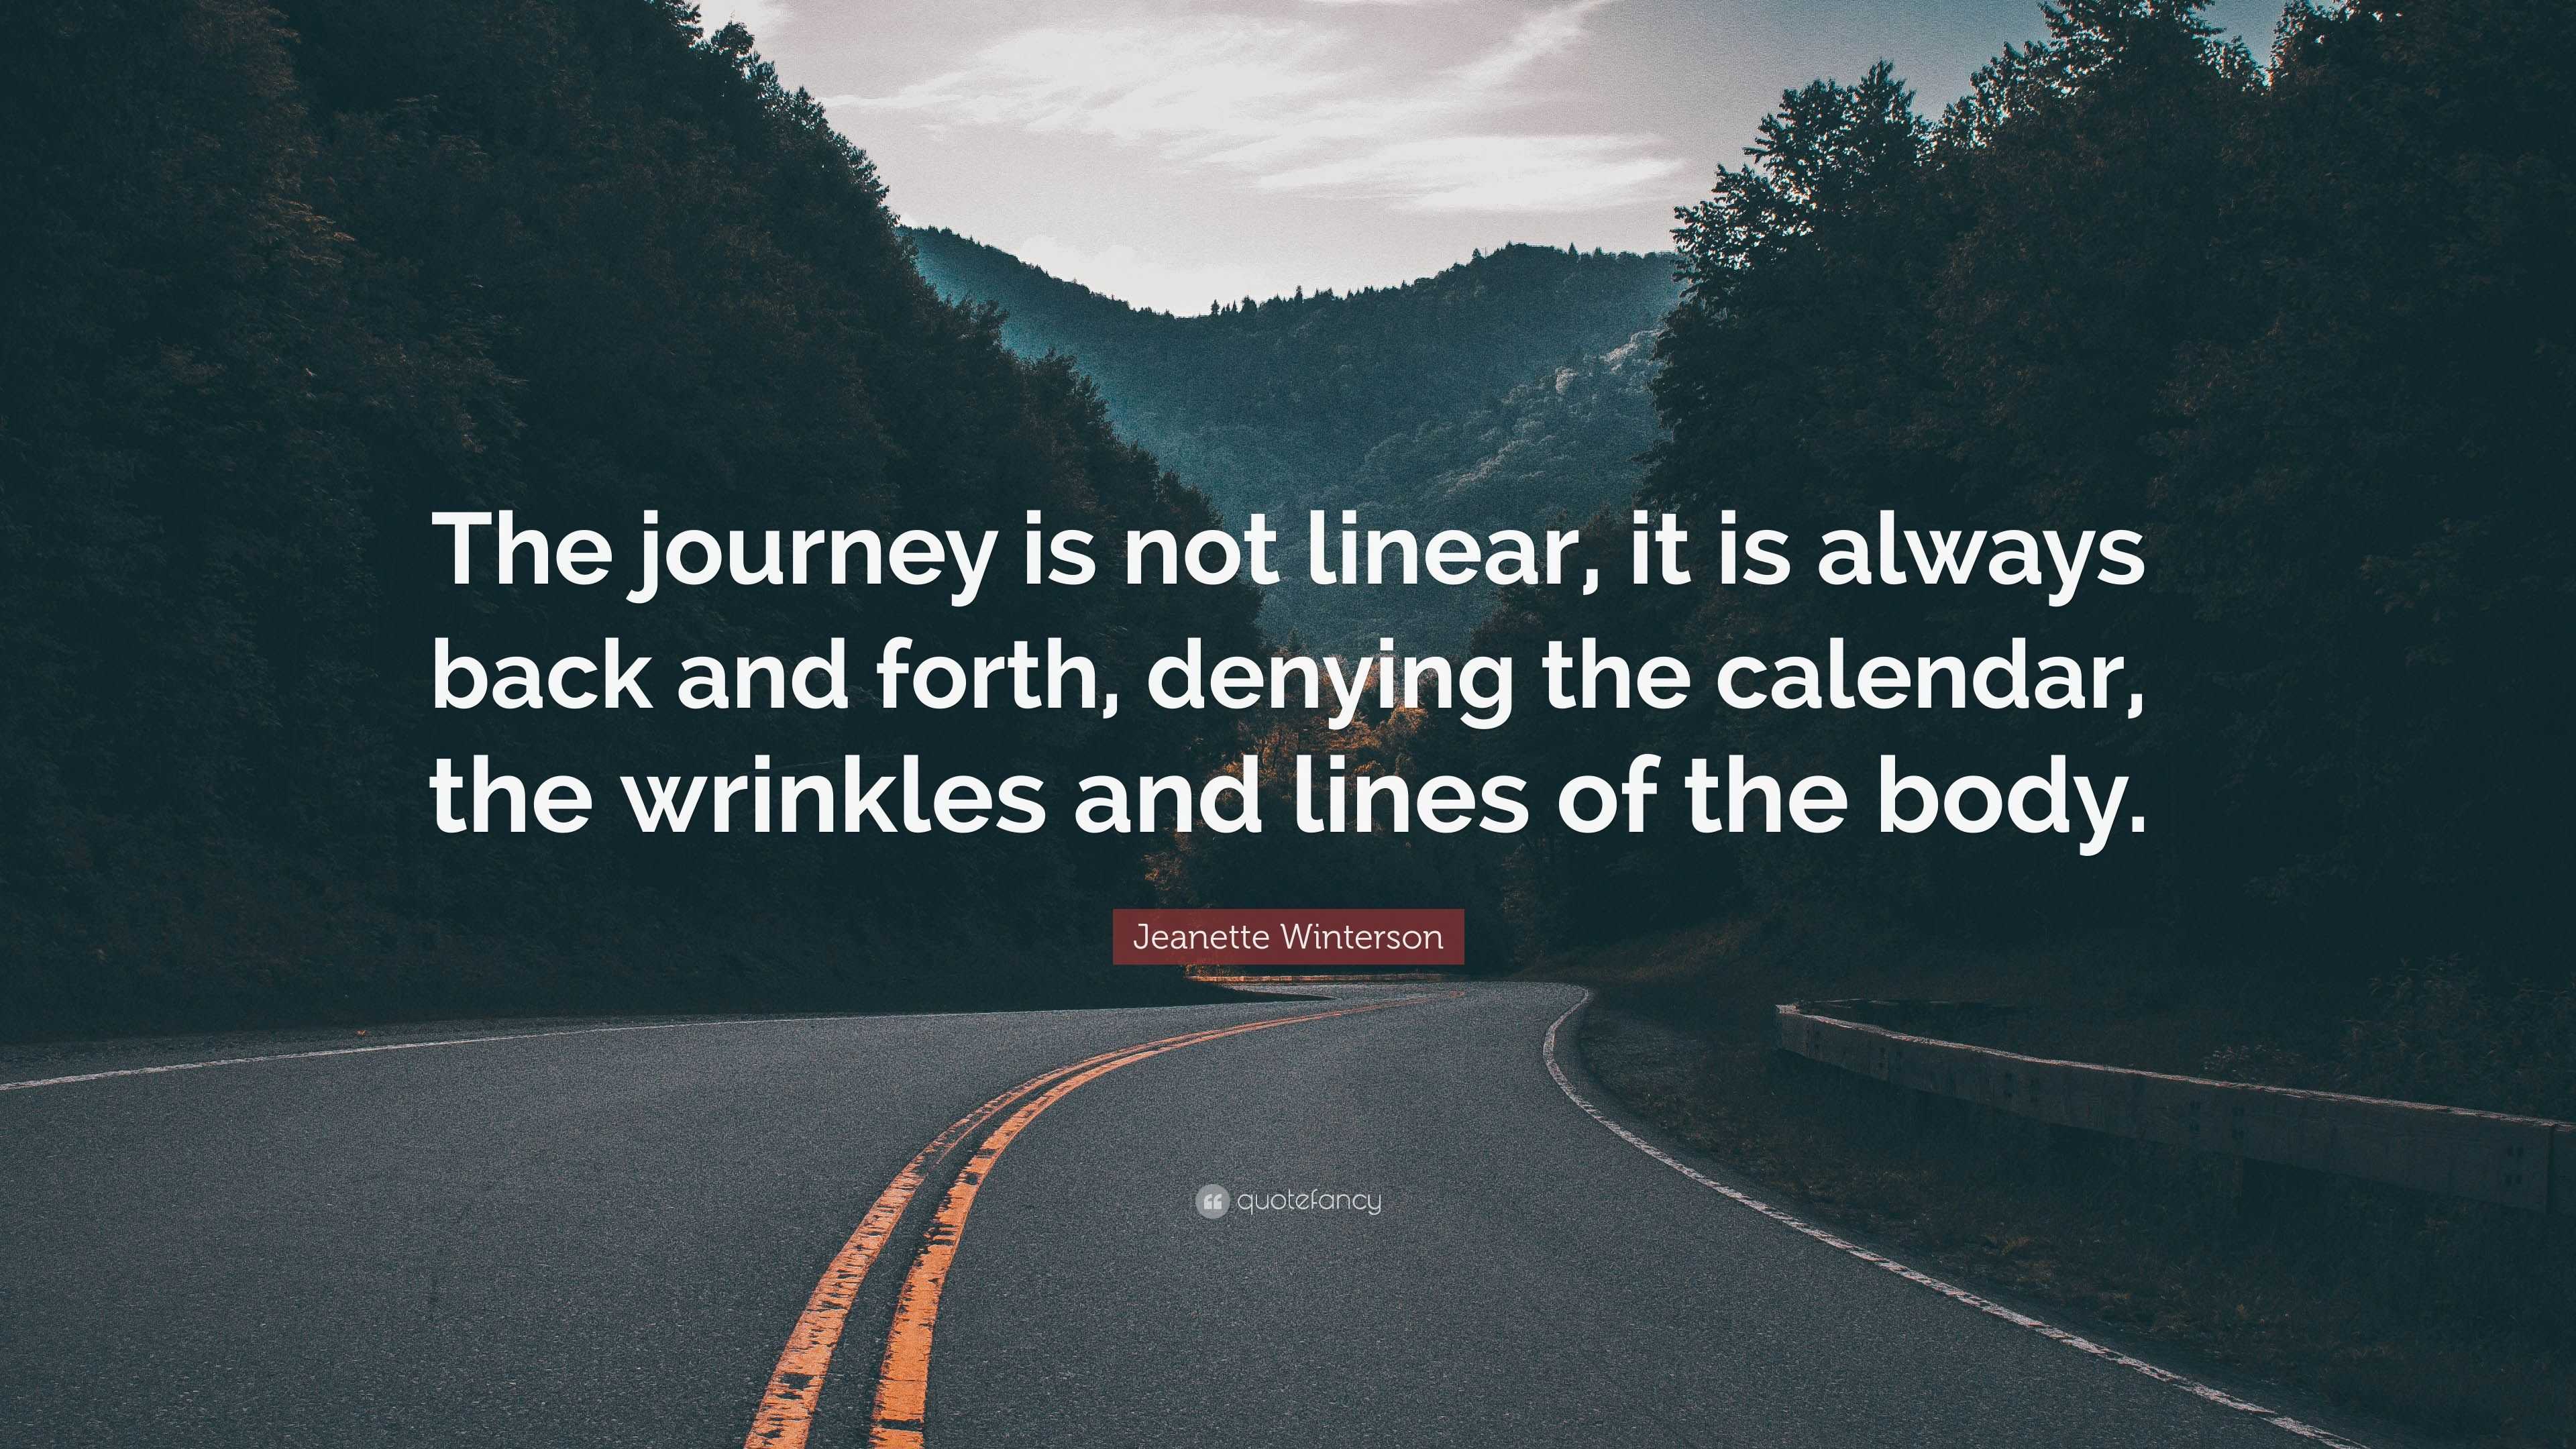 fitness journey is not linear